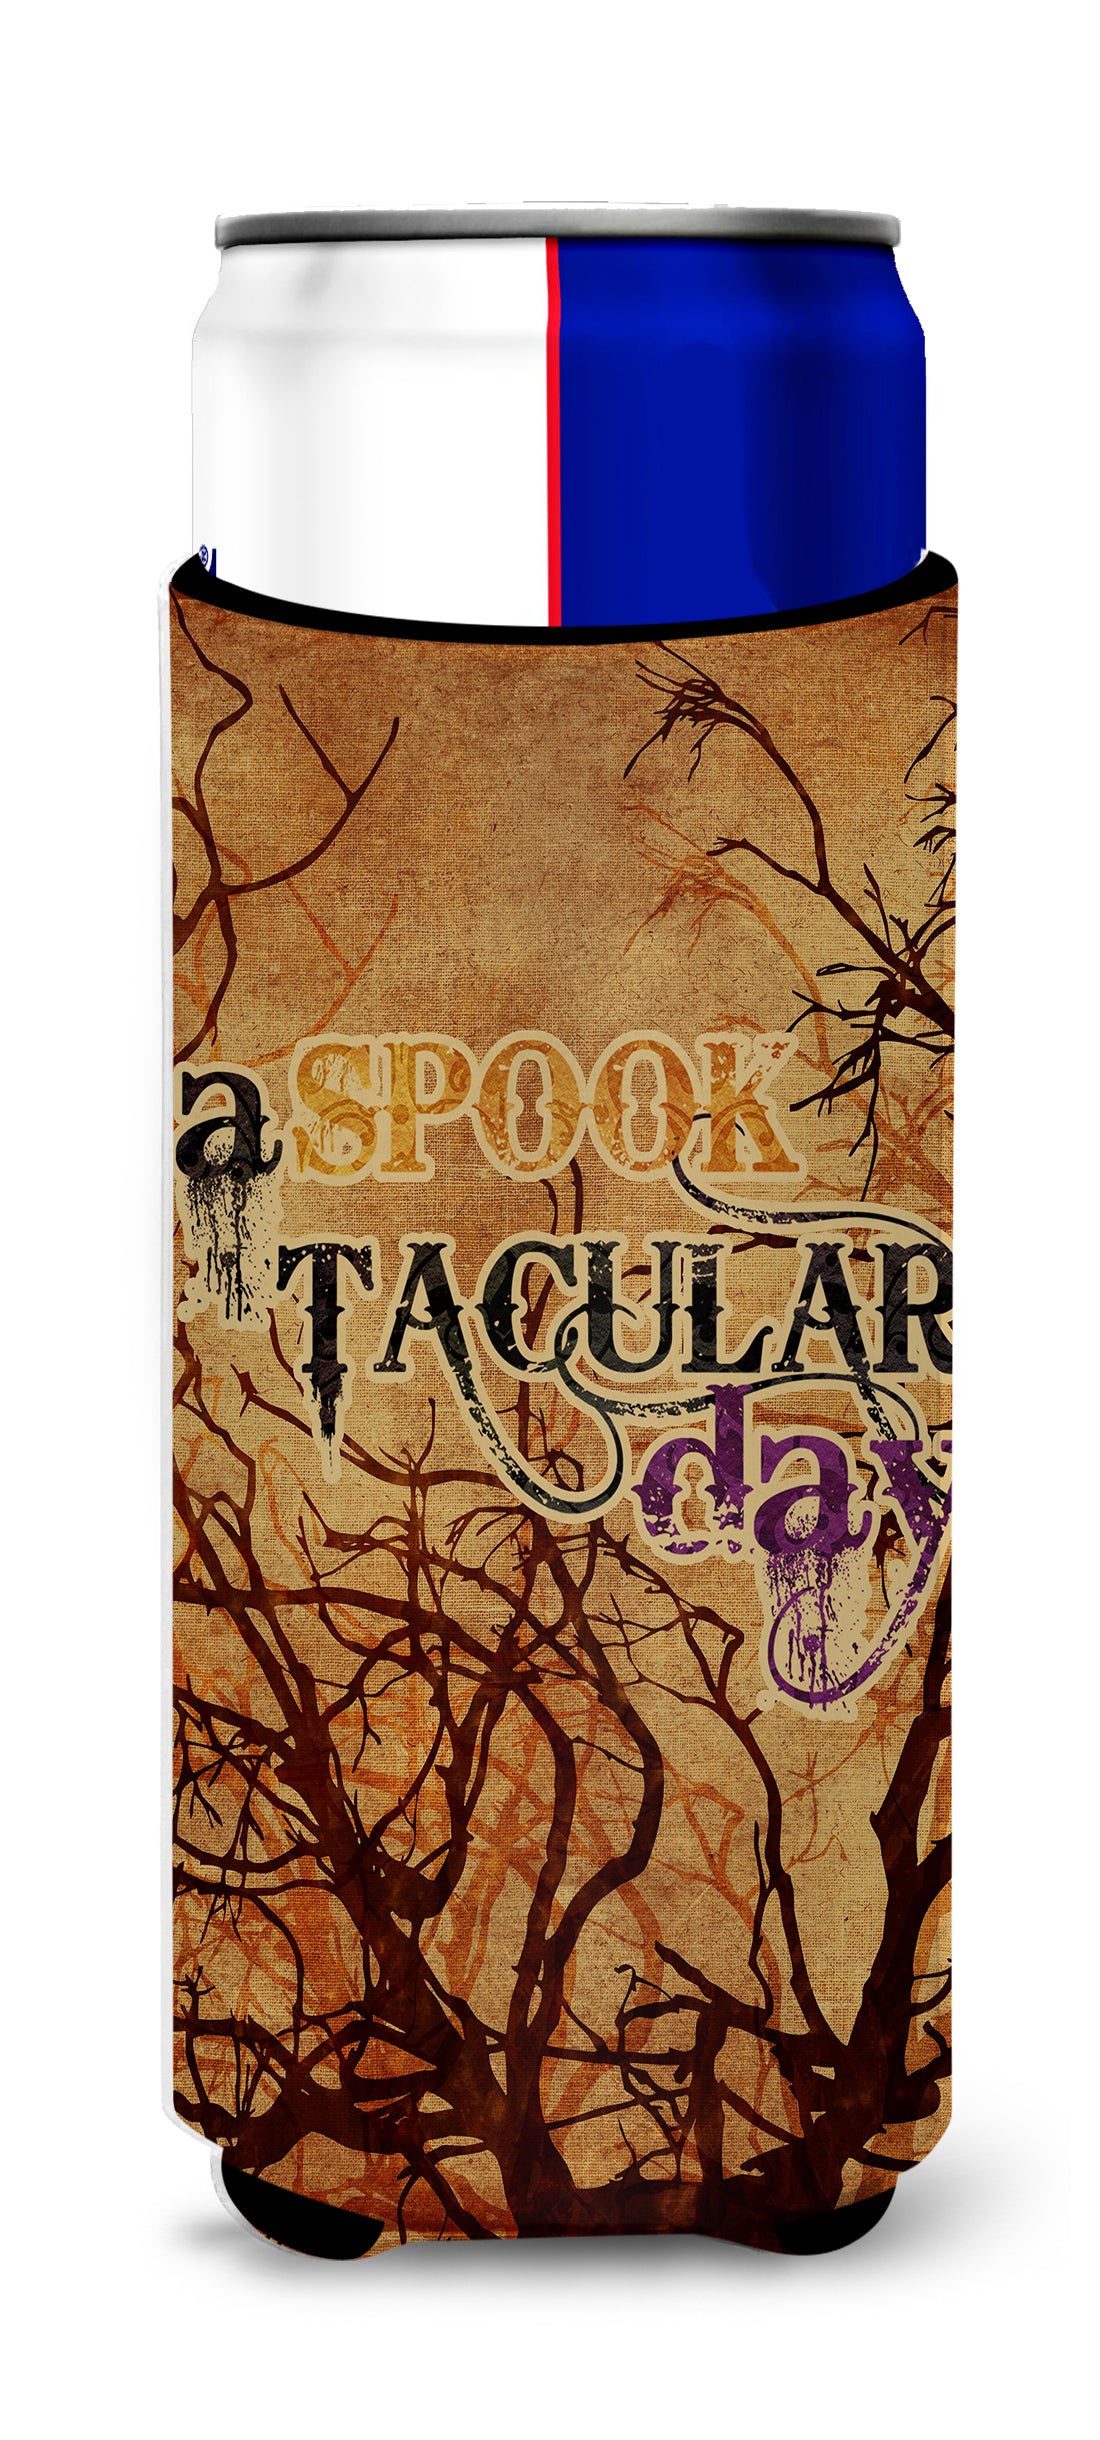 A Spook Tacular Day Halloween Ultra Beverage Insulators for slim cans SB3016MUK.